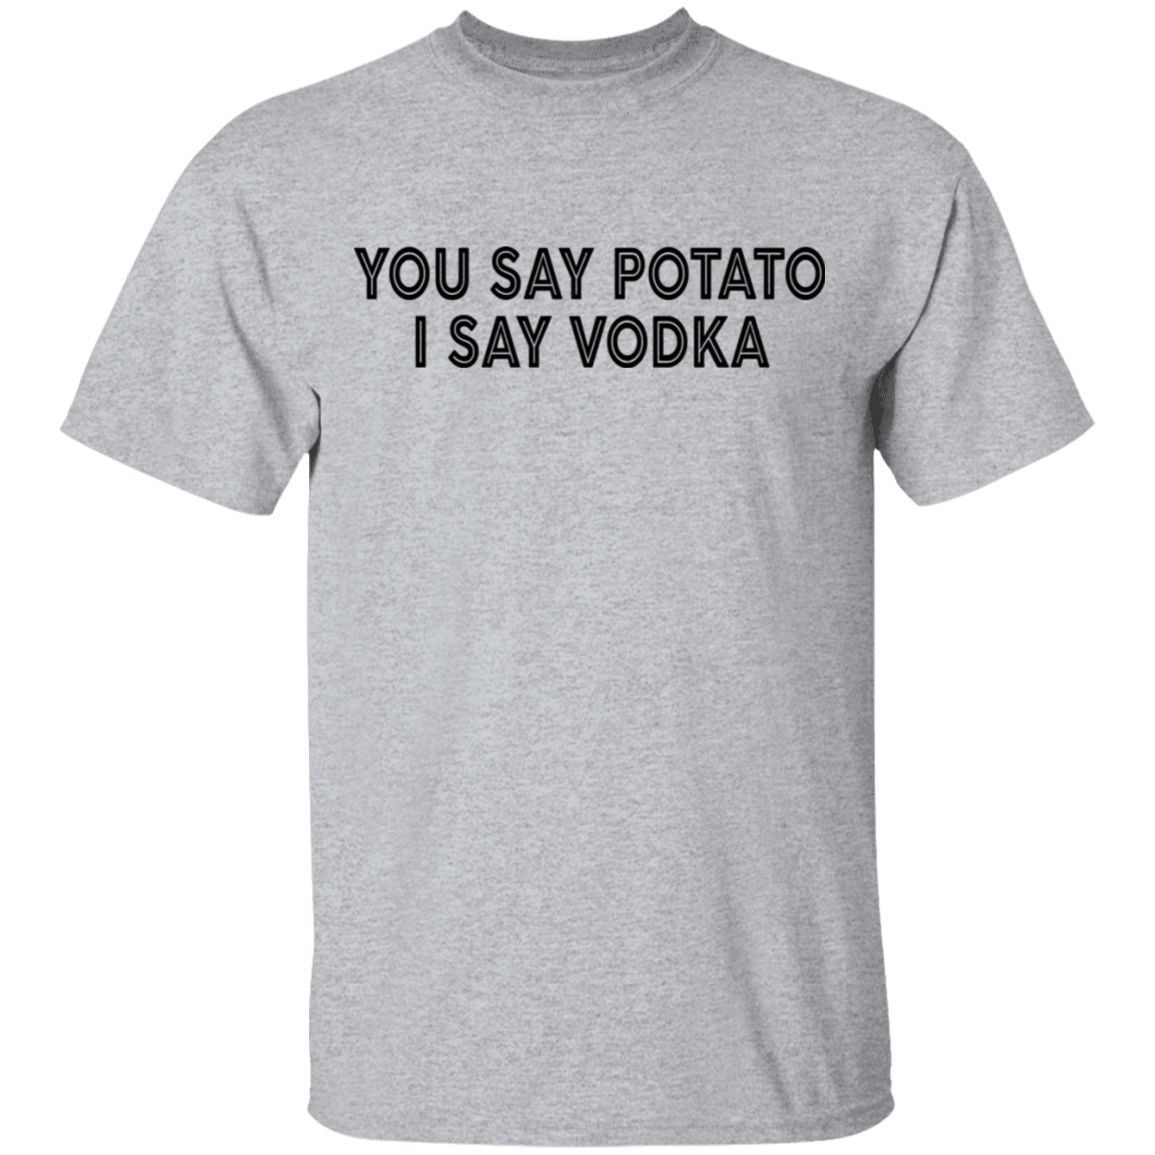 V is for Vodka Graphic Tee (S-2XL)